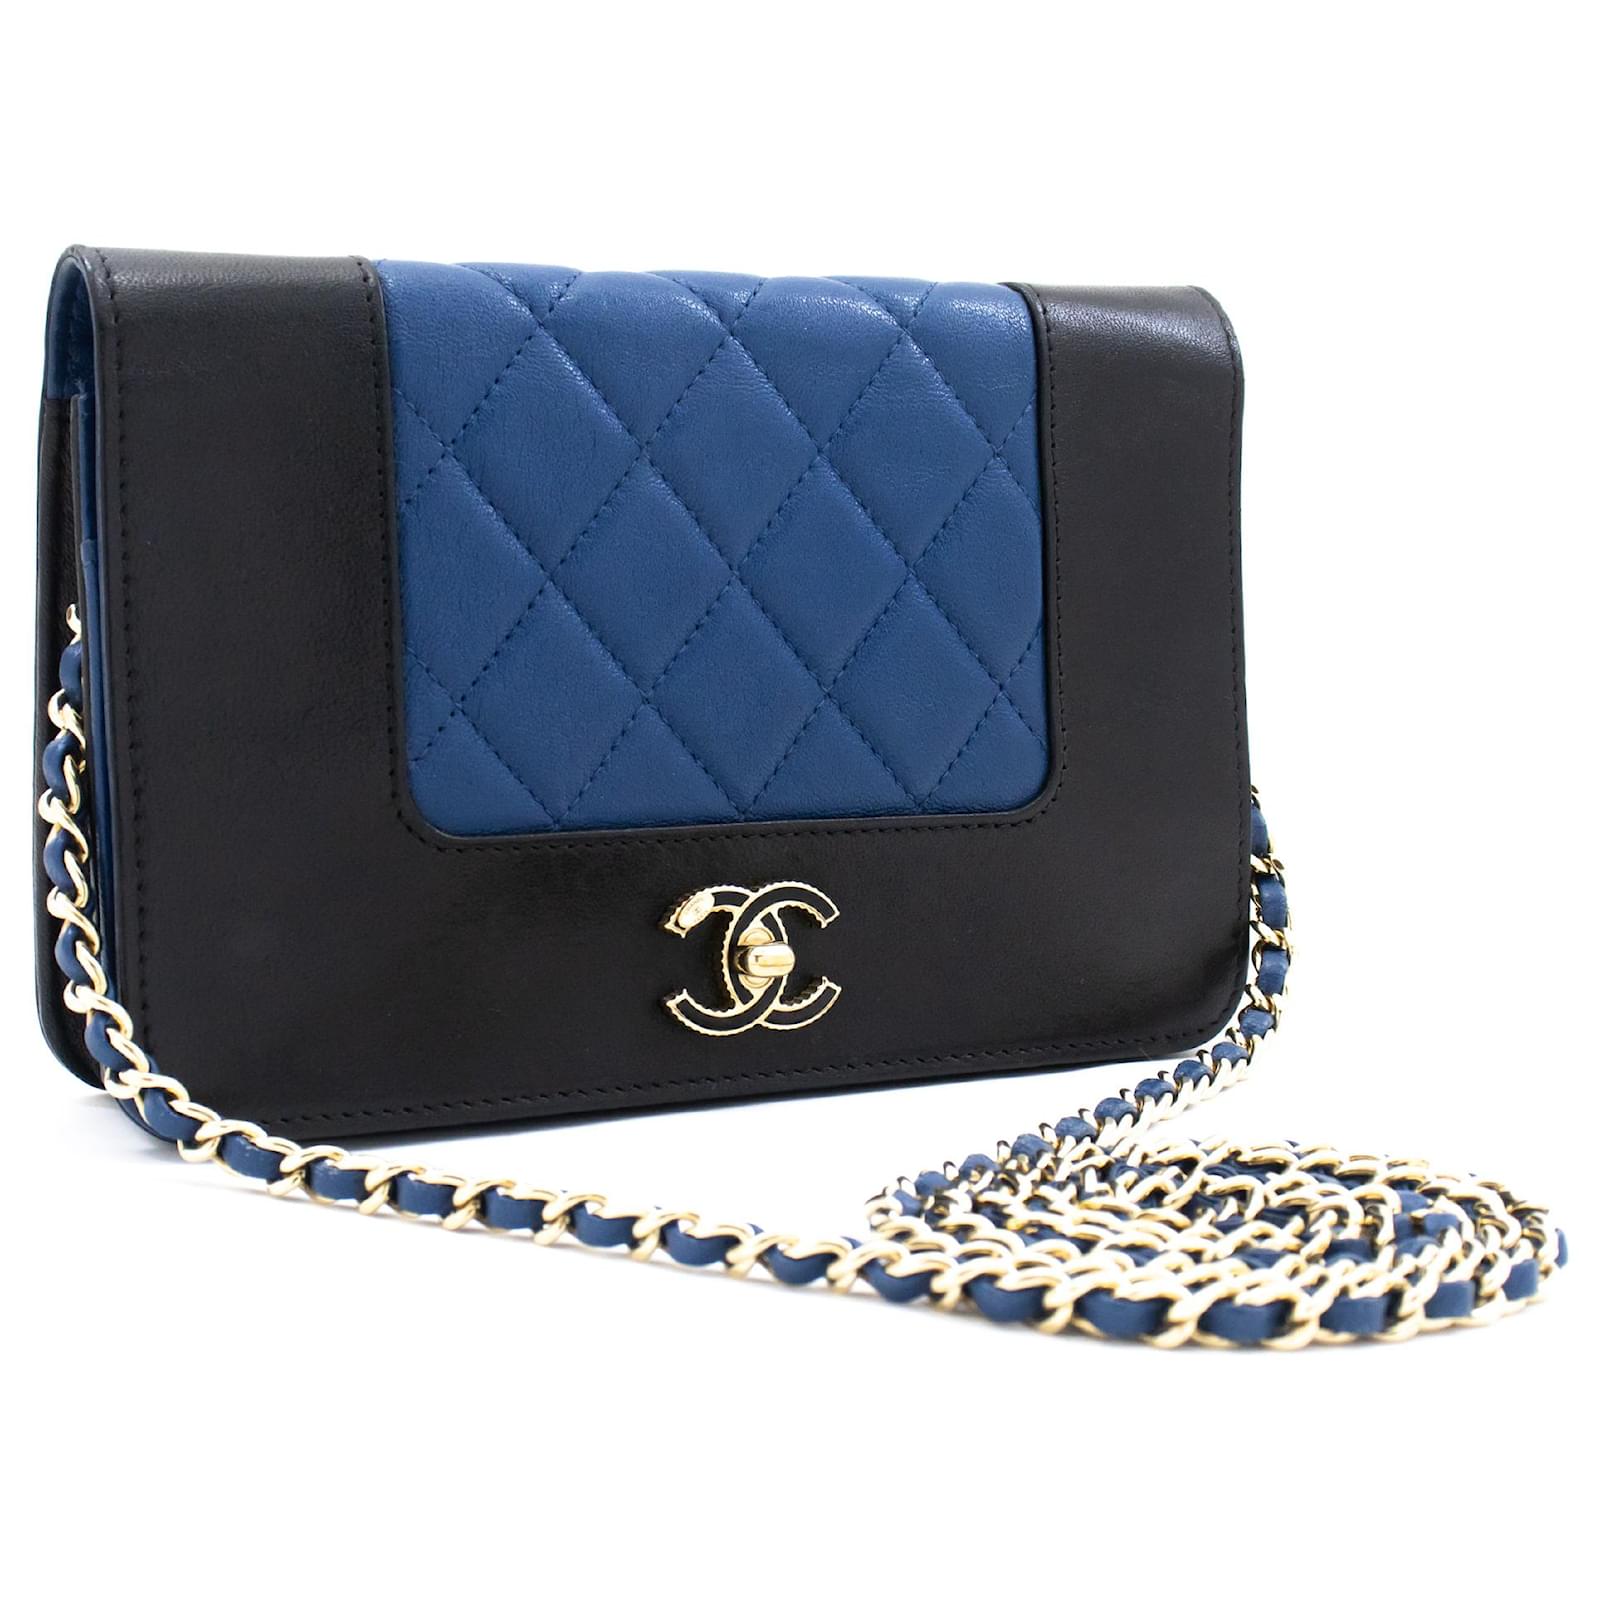 CHANEL 22C Rare Lambskin Pearl Crush Black Gold Hardware WOC Wallet on Chain  | Chanel wallet on chain lambskin, Chanel wallet, Stylish shoulder bag